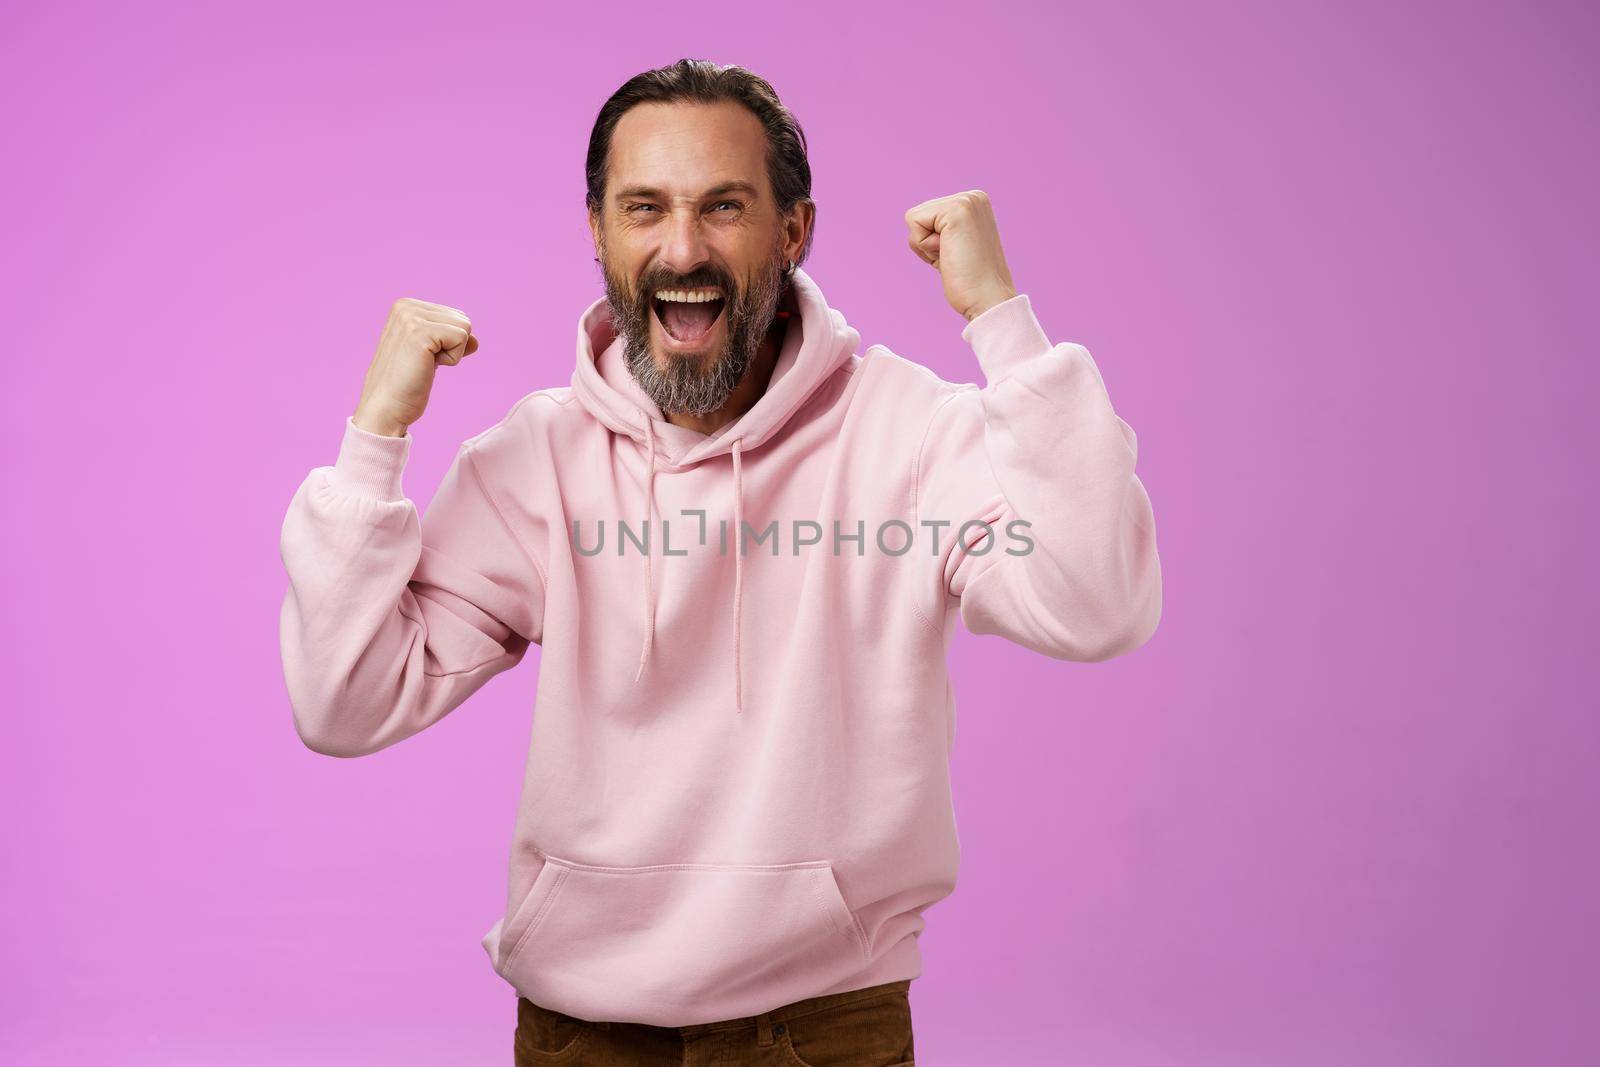 Cheerful supportive manly mature adult bearded guy fan yelling raising clenched fists triumphing team scored goal celebrating standing pleased shouting achieving success, posing purple background.